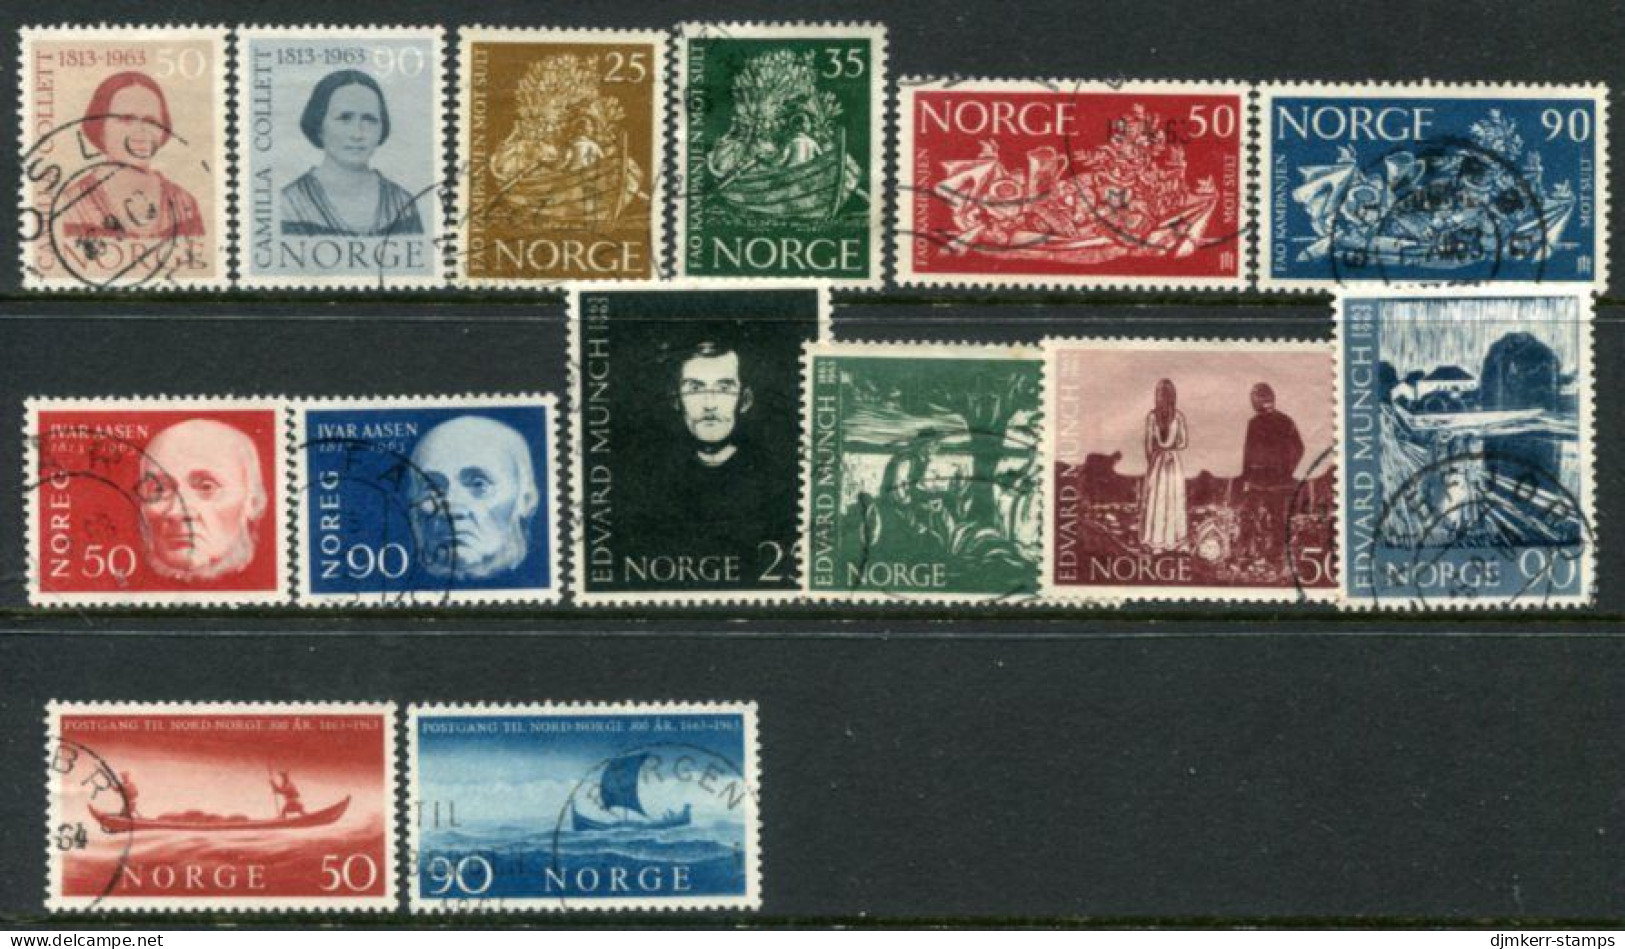 NORWAY 1963 Five Issues Used. - Used Stamps